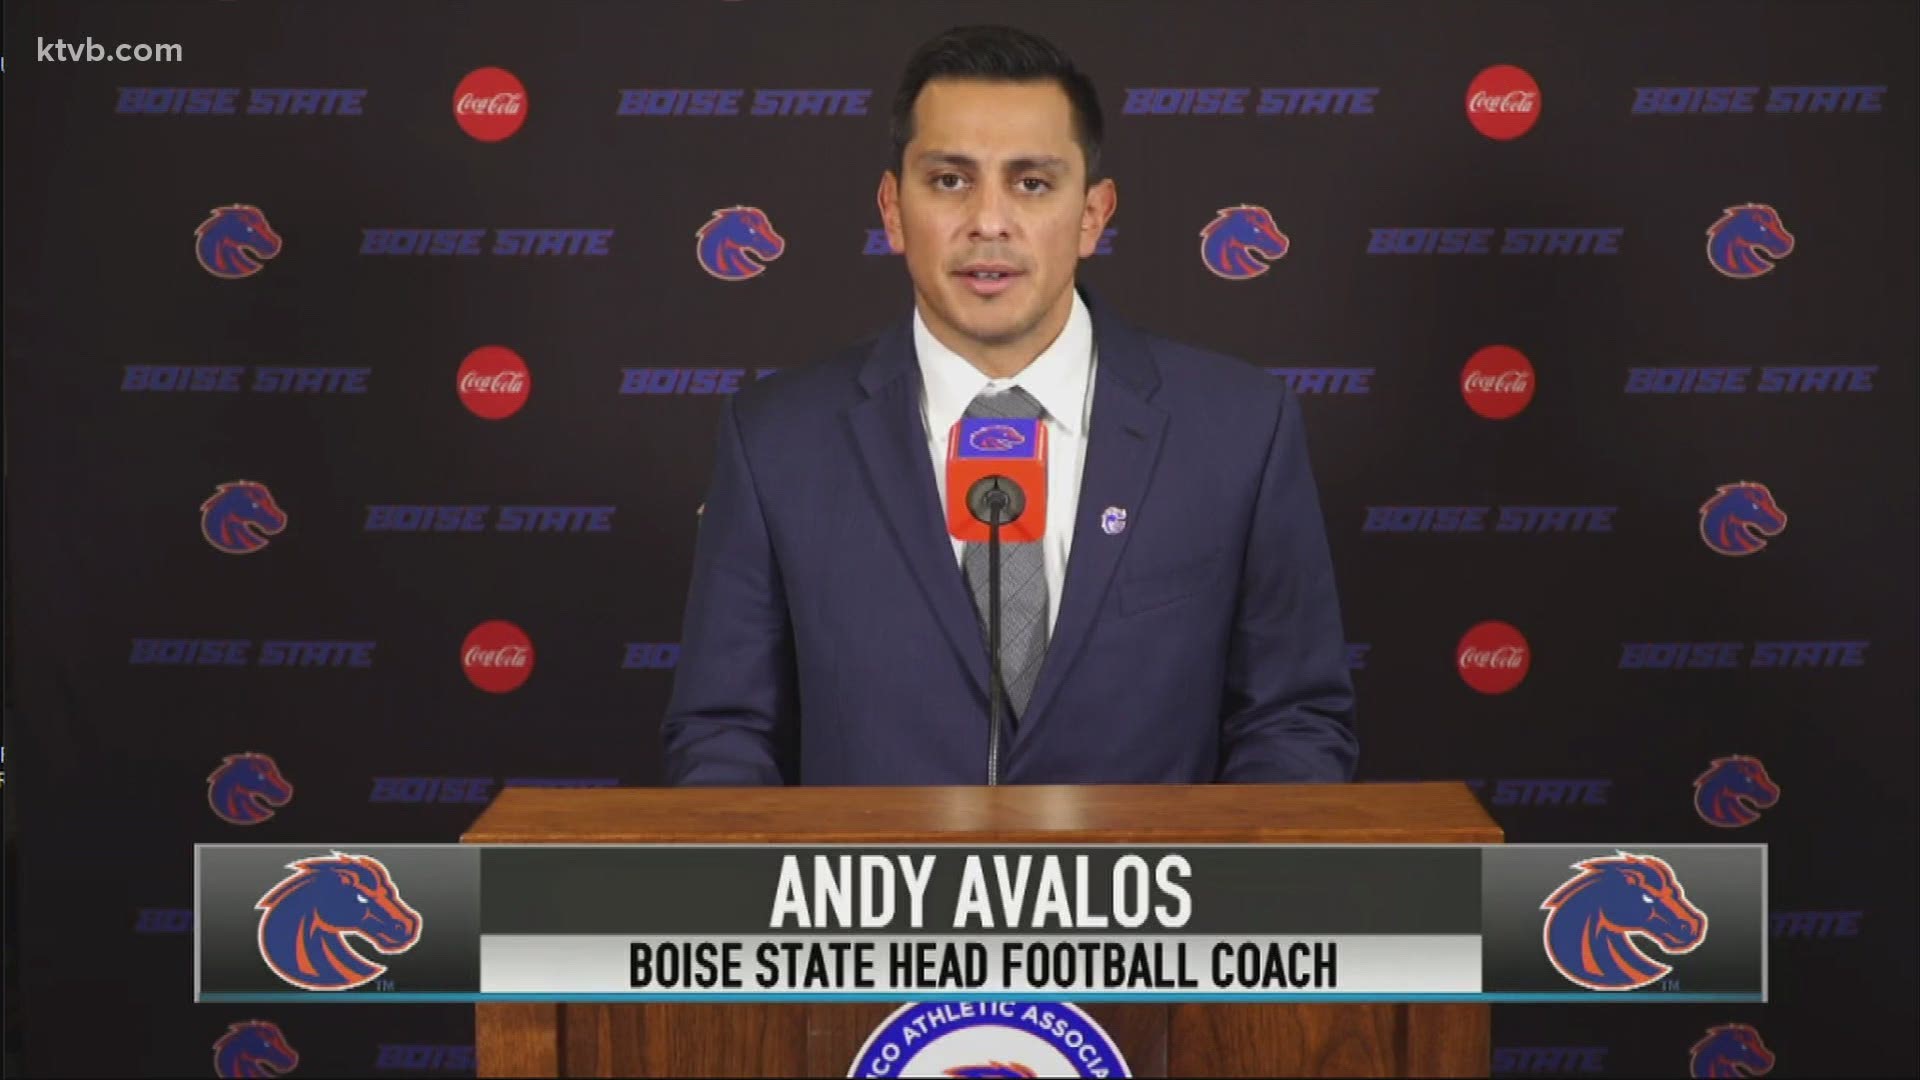 When the idea of a Fiesta Bowl win in his first season was floated, Avalos chuckled and said to be the pressure he will focus on the day to day.